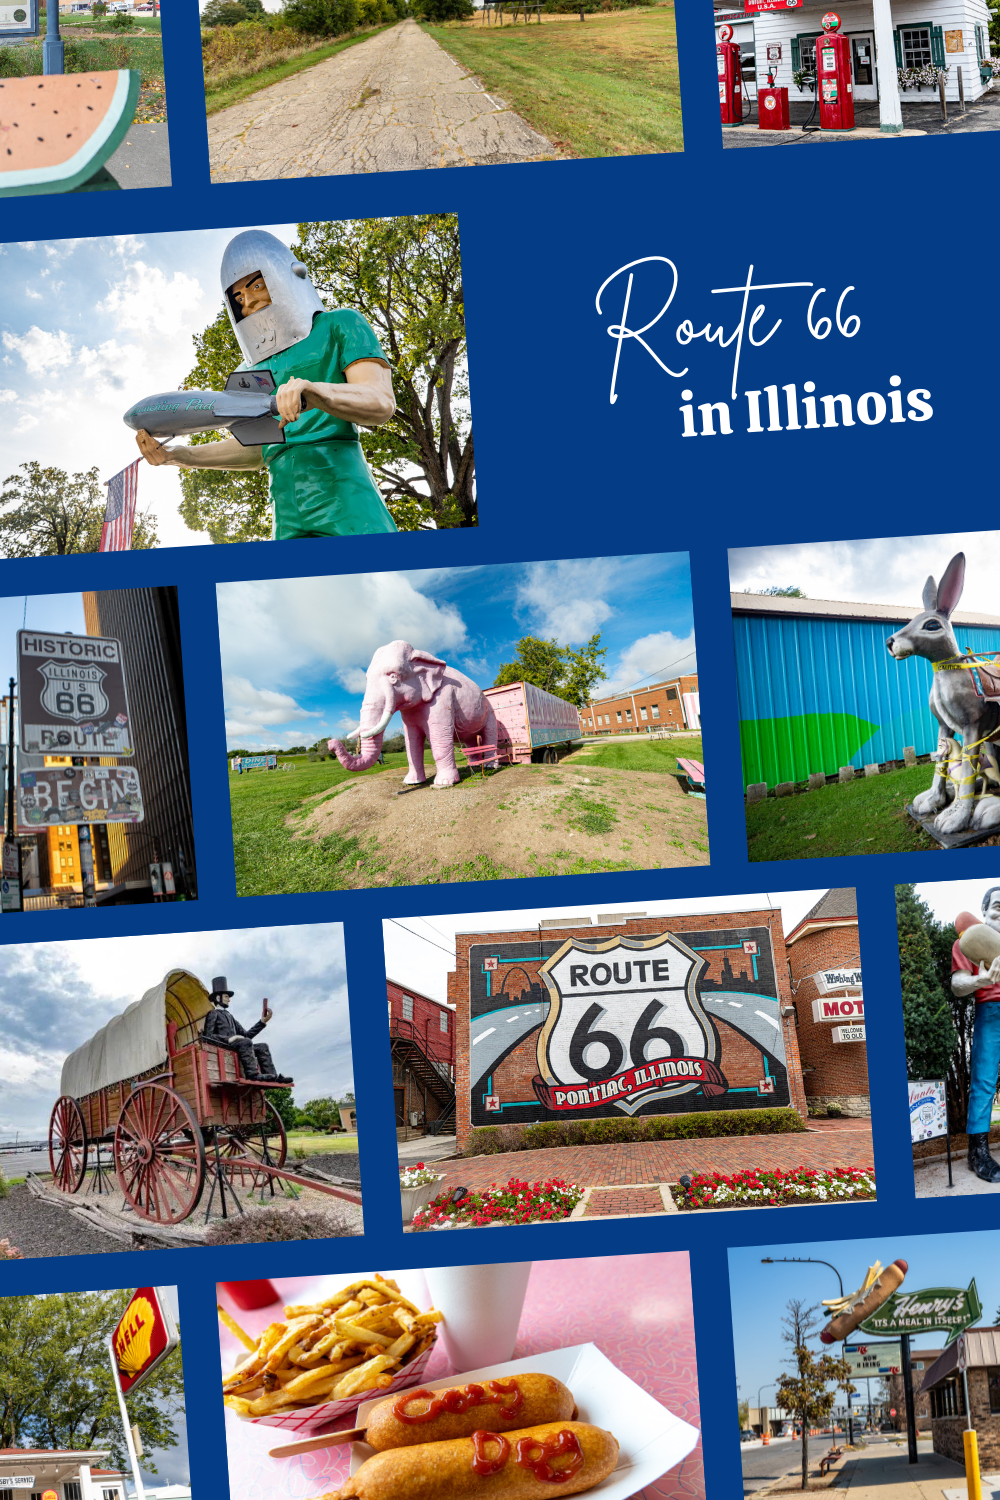 If you’re looking for classic roadside attractions, iconic diners, informative museums, and nostalgic nod to the past, a road trip on Route 66 in Illinois offers everything you’re looking for. Pull over at any and all of the stops on this complete list of Illinois Route 66 Attractions and start planning your road trip on the Mother Road today. #Route66 #Illinois #Route66RoadTrip #IllinoisRoute66 #IllinoisRoute66RoadTrip #IllinoisRoadTrip #travel #RoadTrip